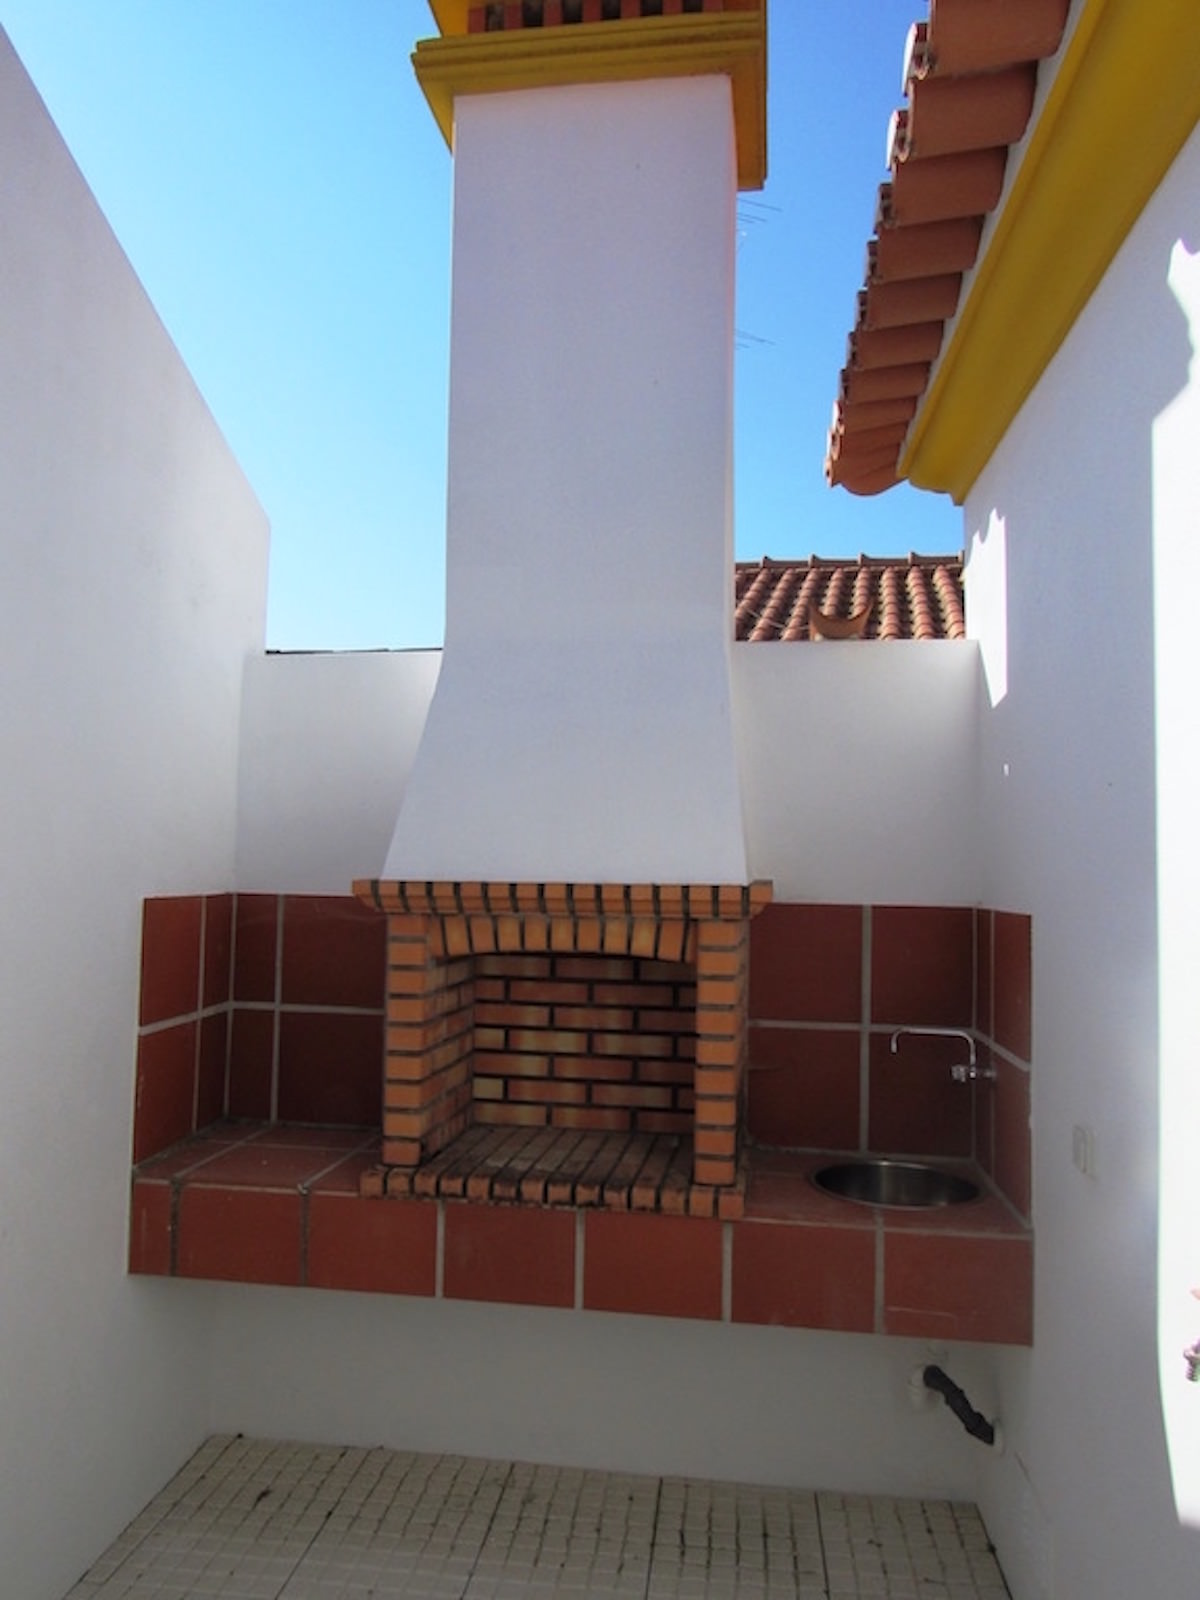 Typical Portuguese house for sale Obidos